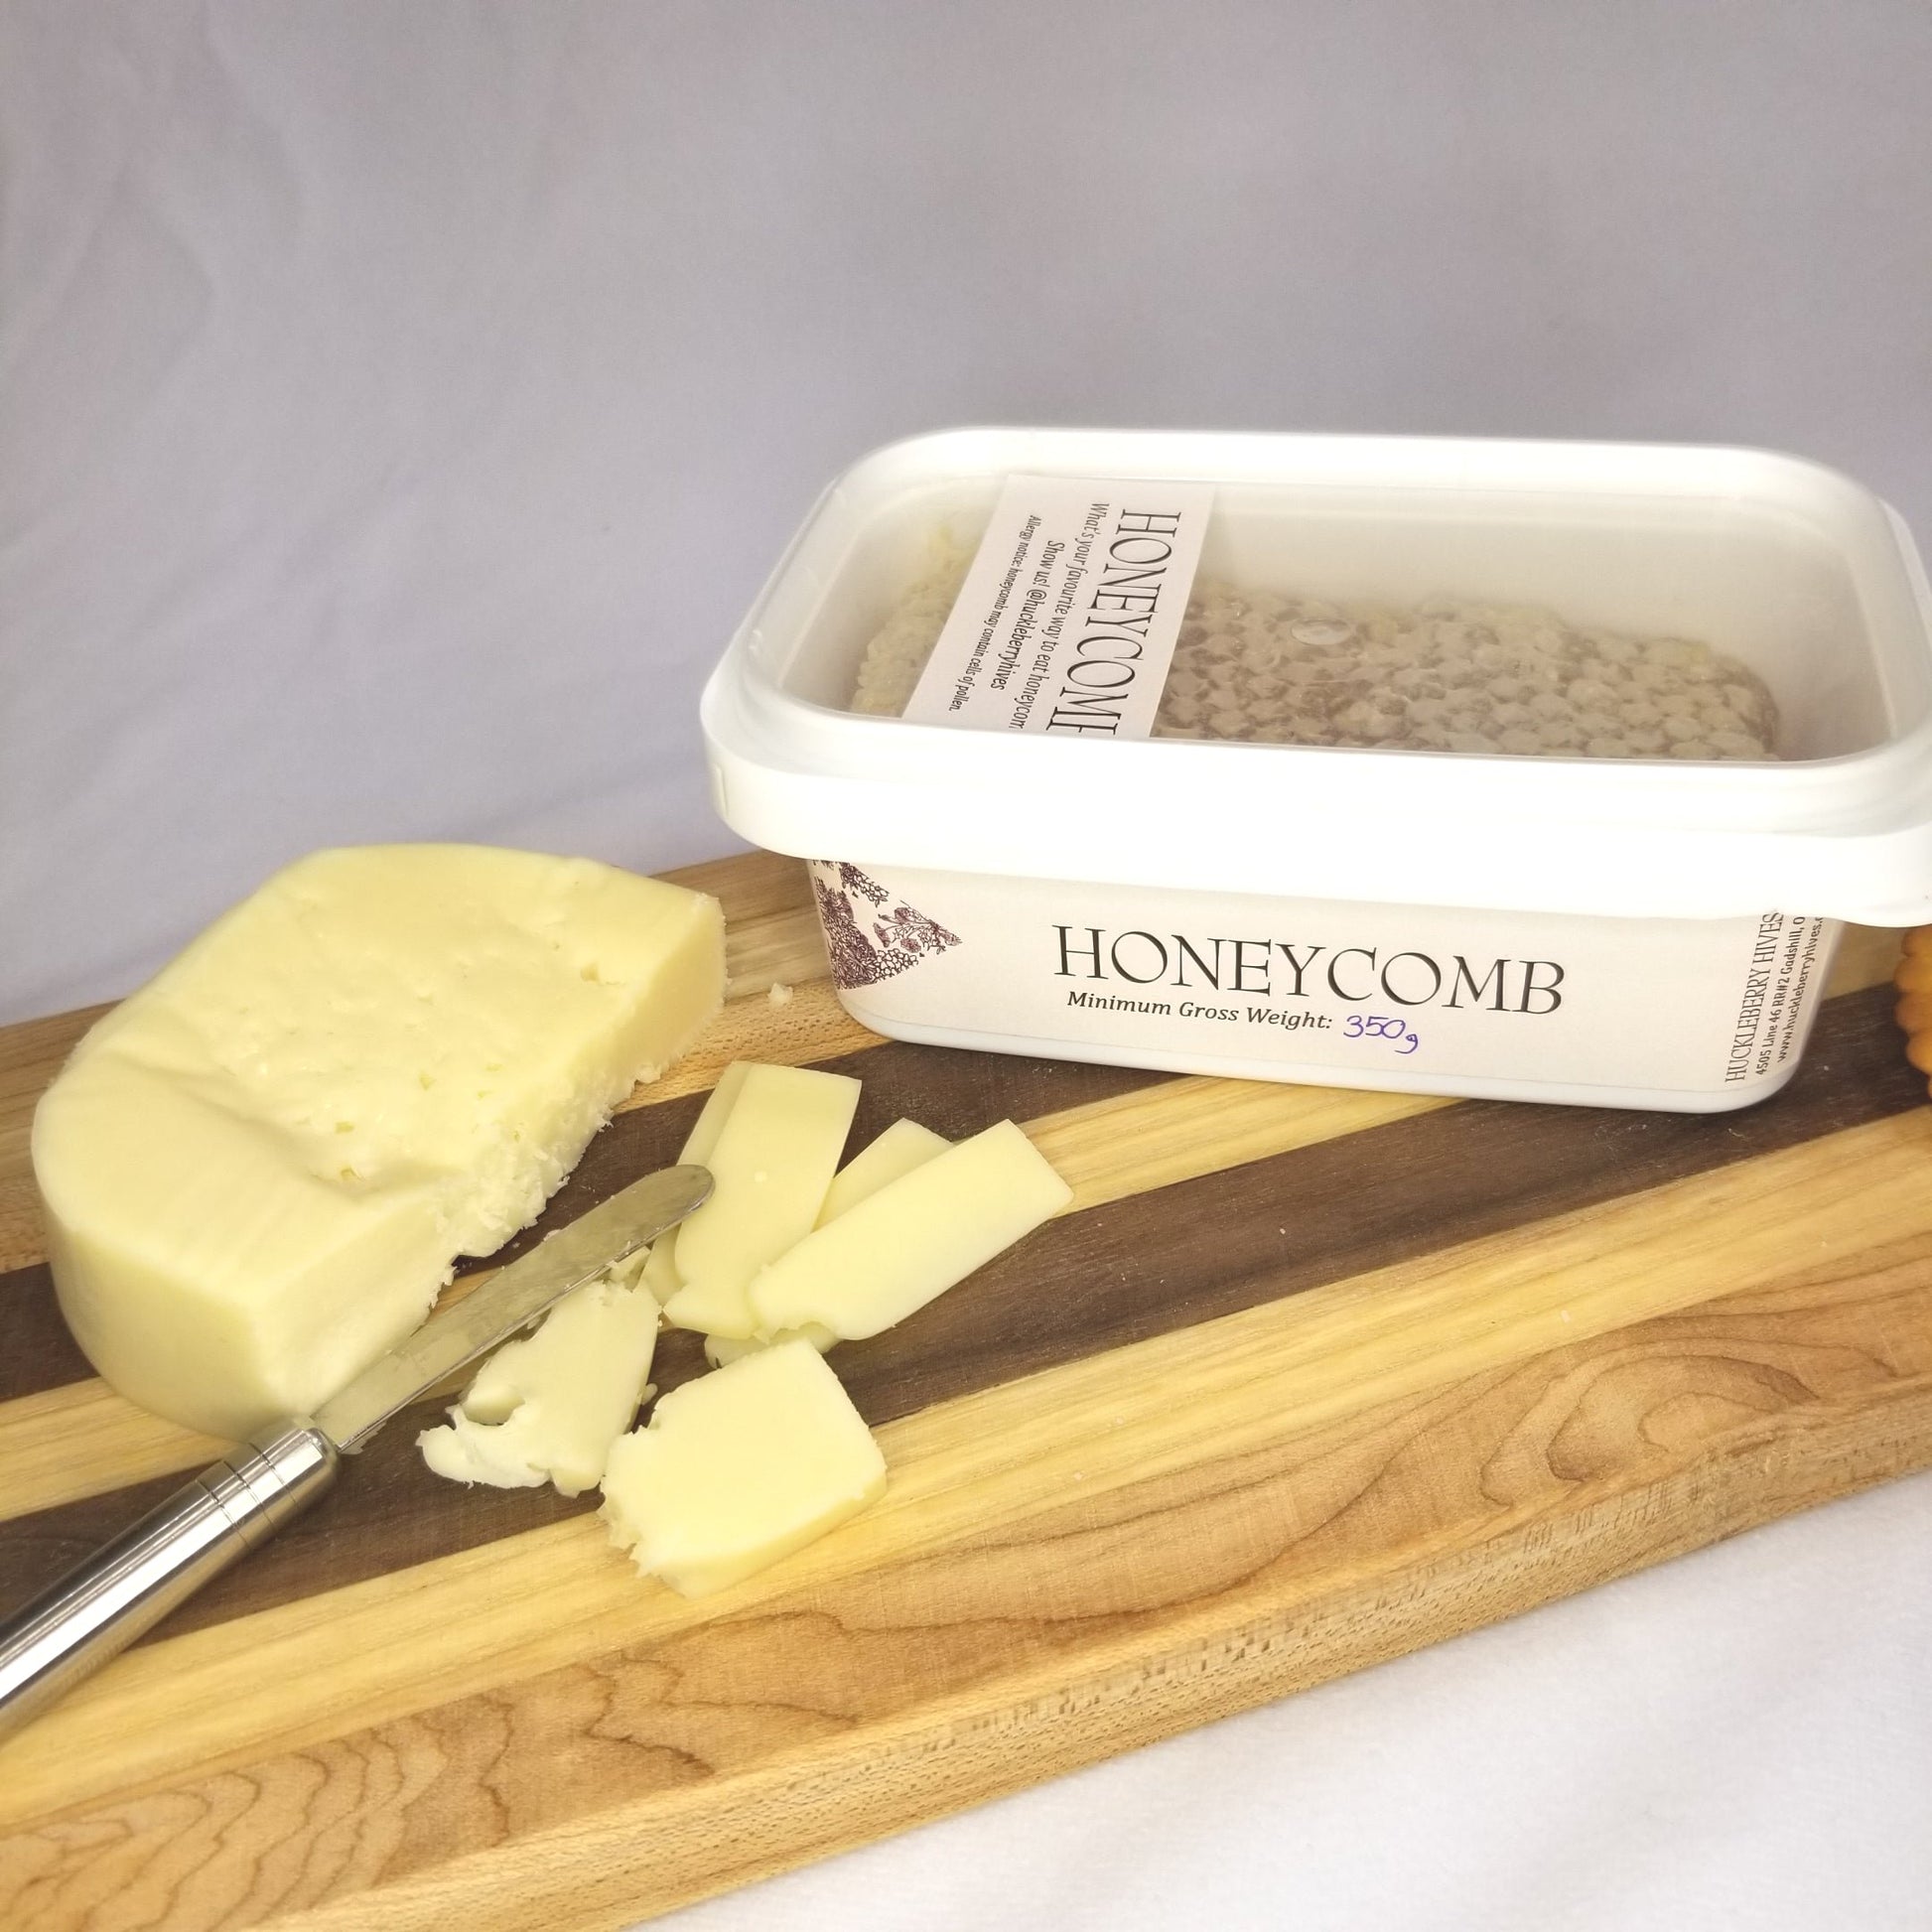 Packaged honeycomb sits beside cheese on a wooden charcuterie board.